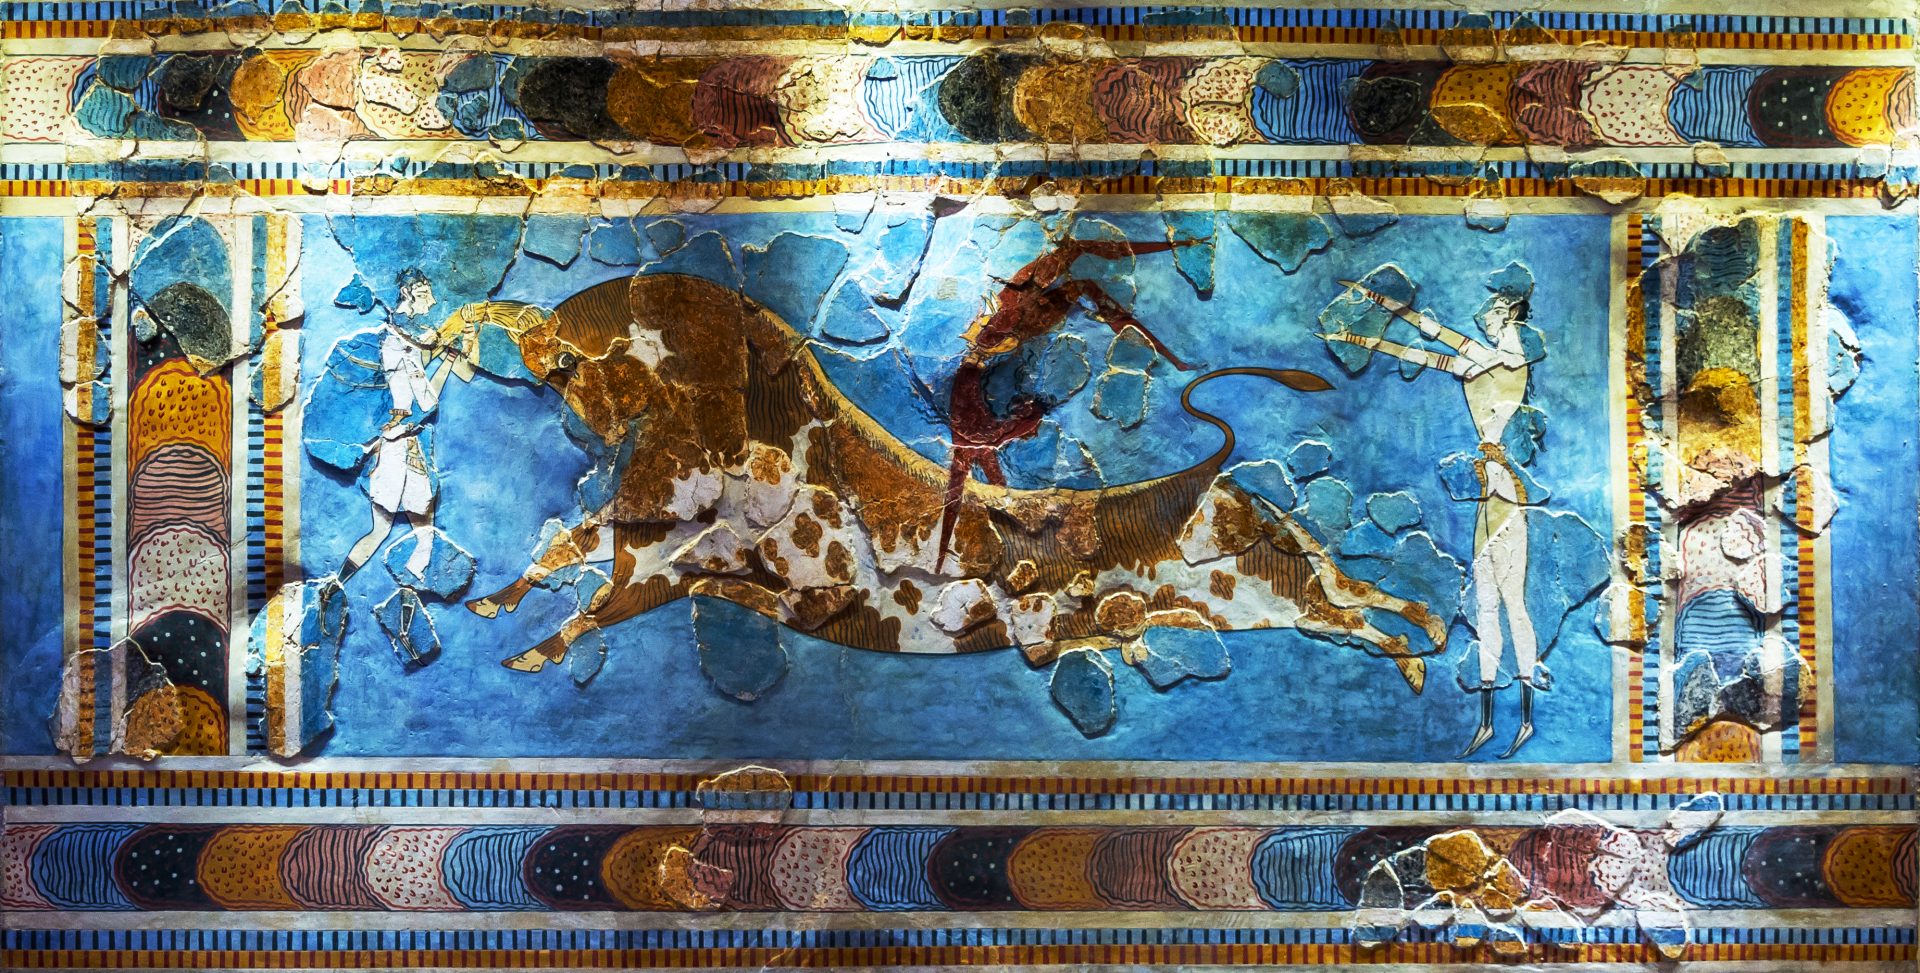 Original Bull-leaping fresco from Knossos palace, Crete, dating 1600-1450 BCE. This portion of the Toreador Fresco captures an acrobat on a bull's back, another readying to leap, and a third with arms wide open.